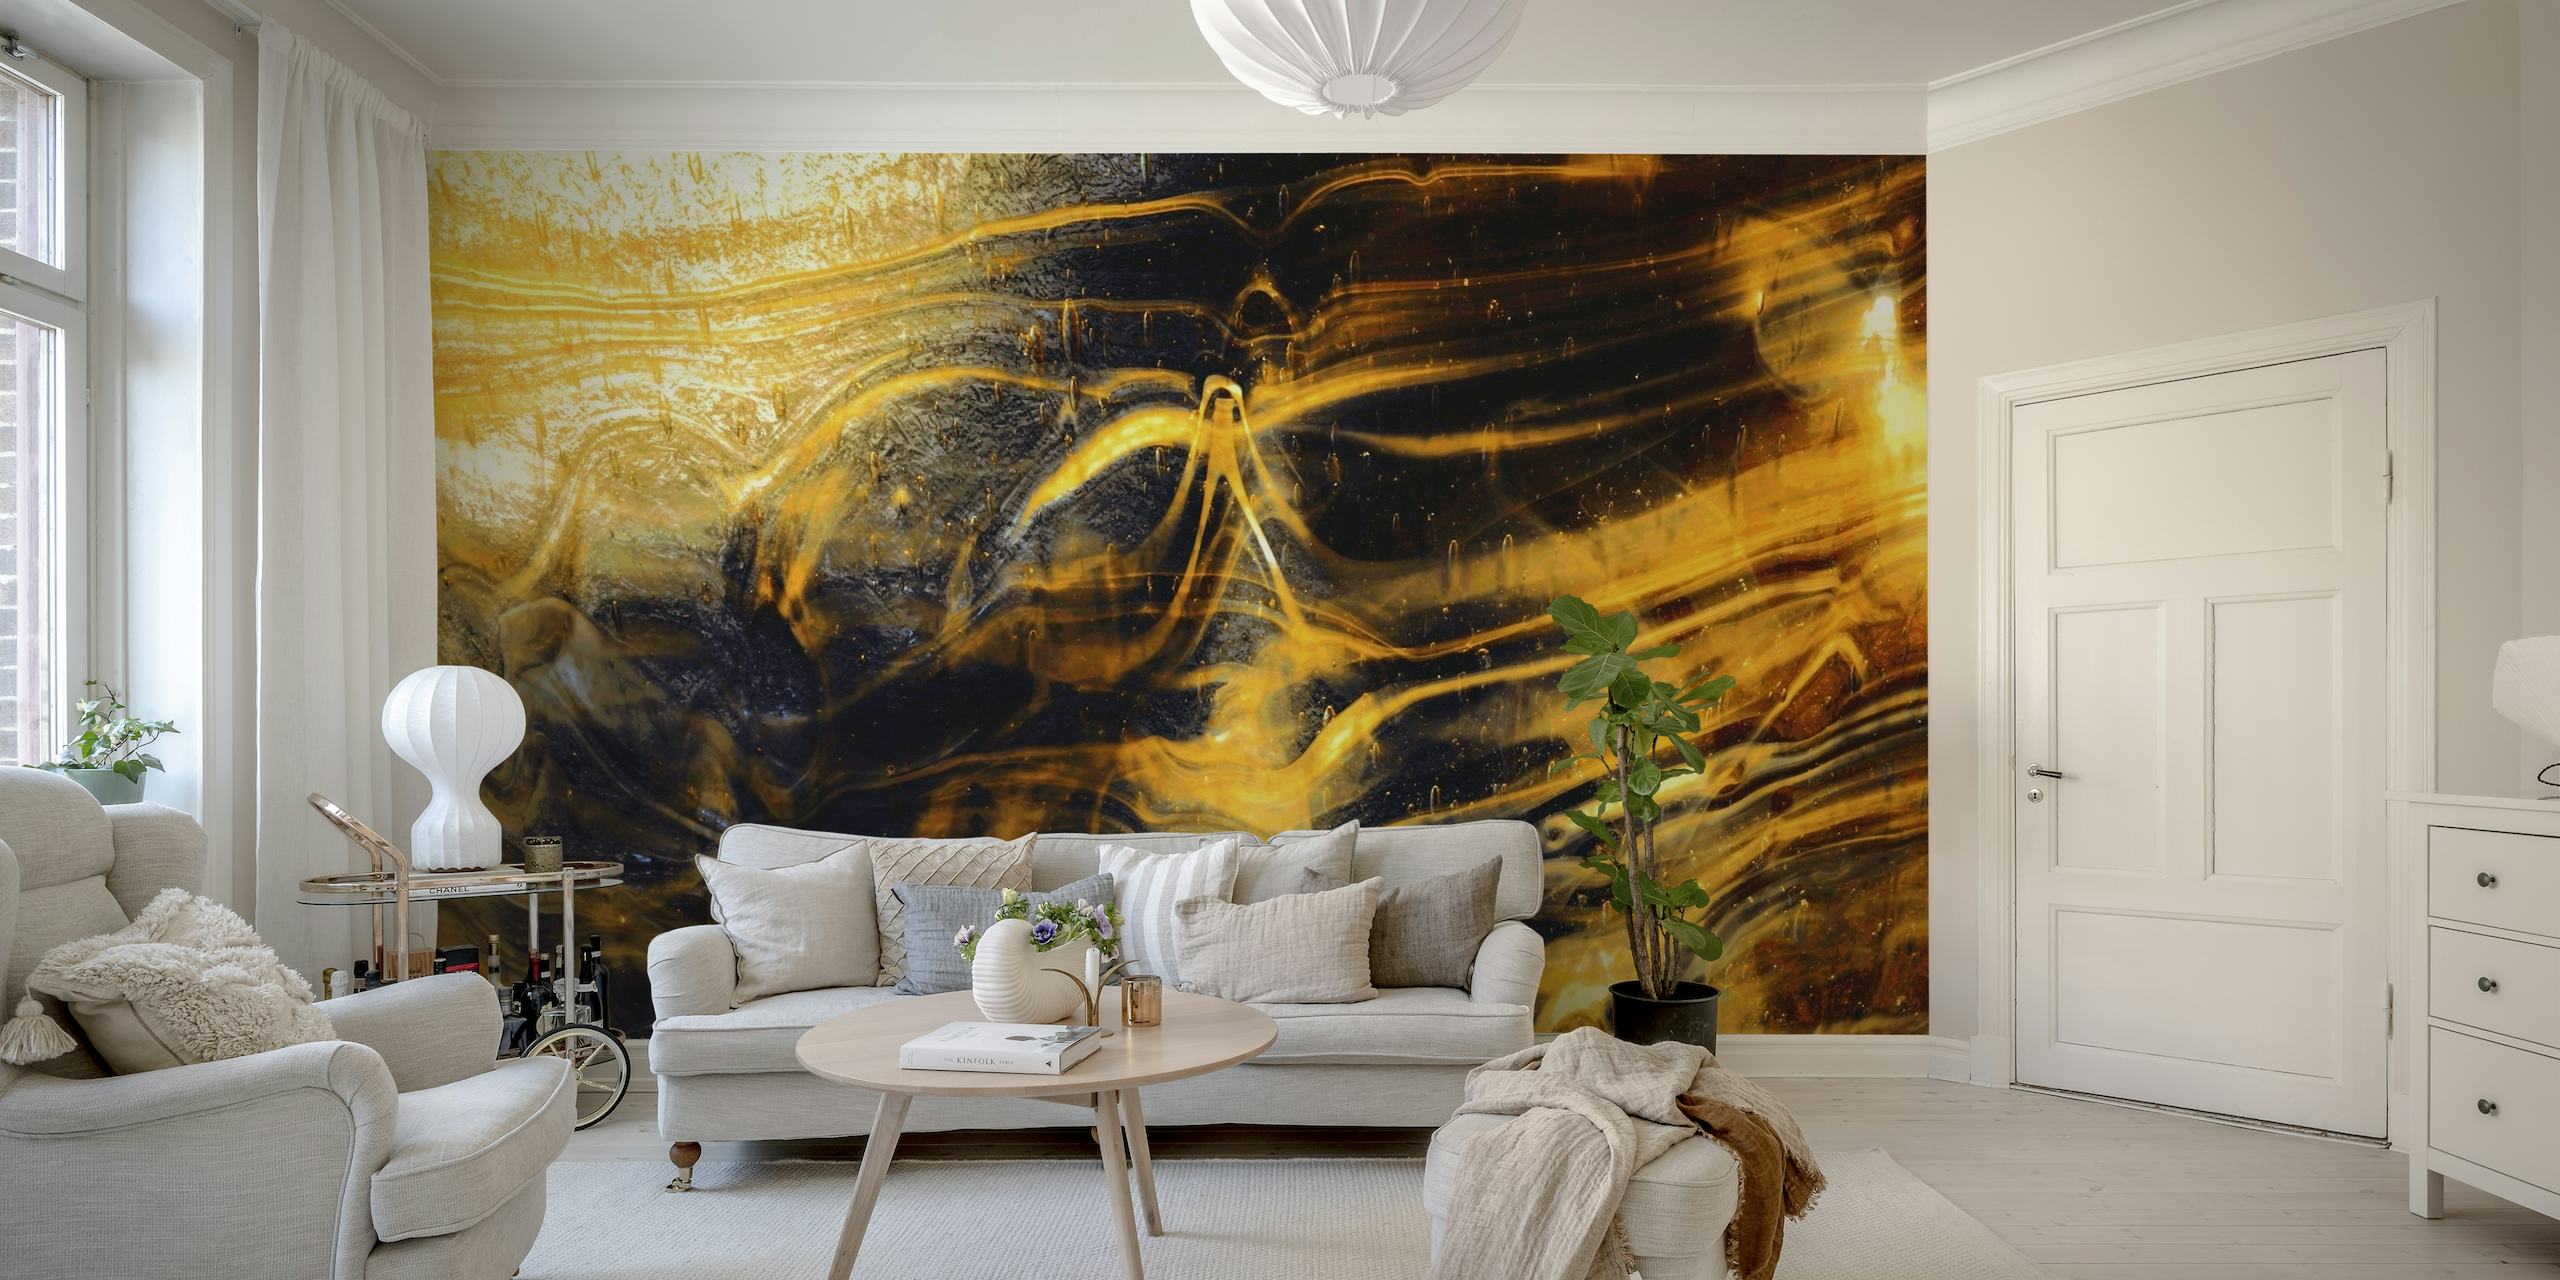 Elegant golden marble pattern wall mural with swirling amber and black colors